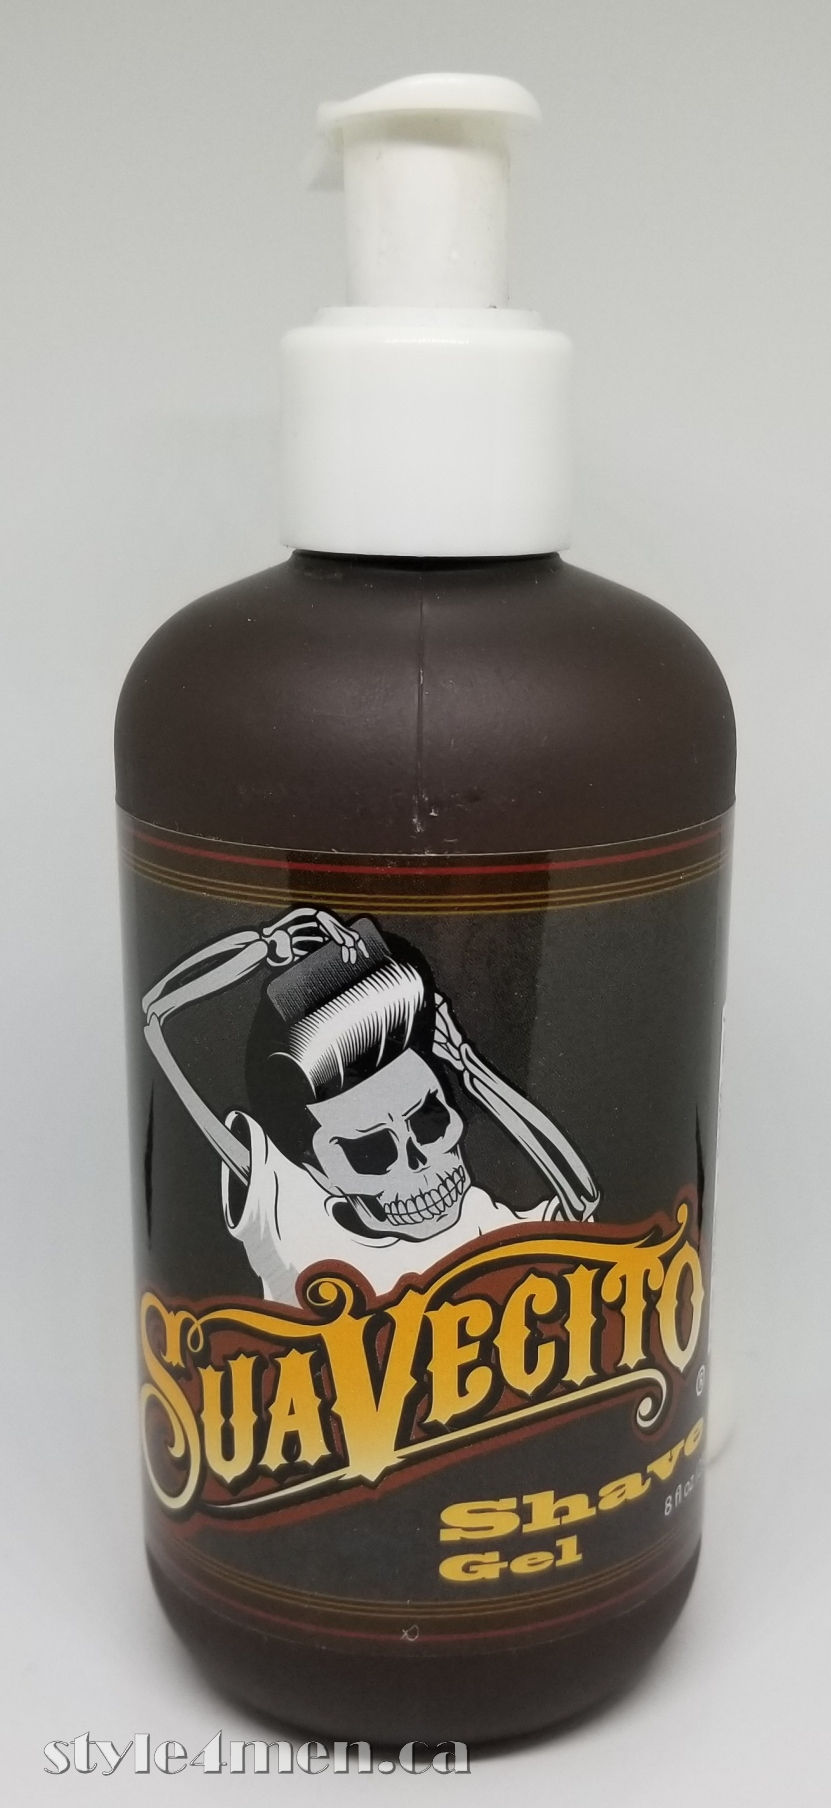 Suavecito Shave Gel and Dark Clove After Shave – Refreshing!